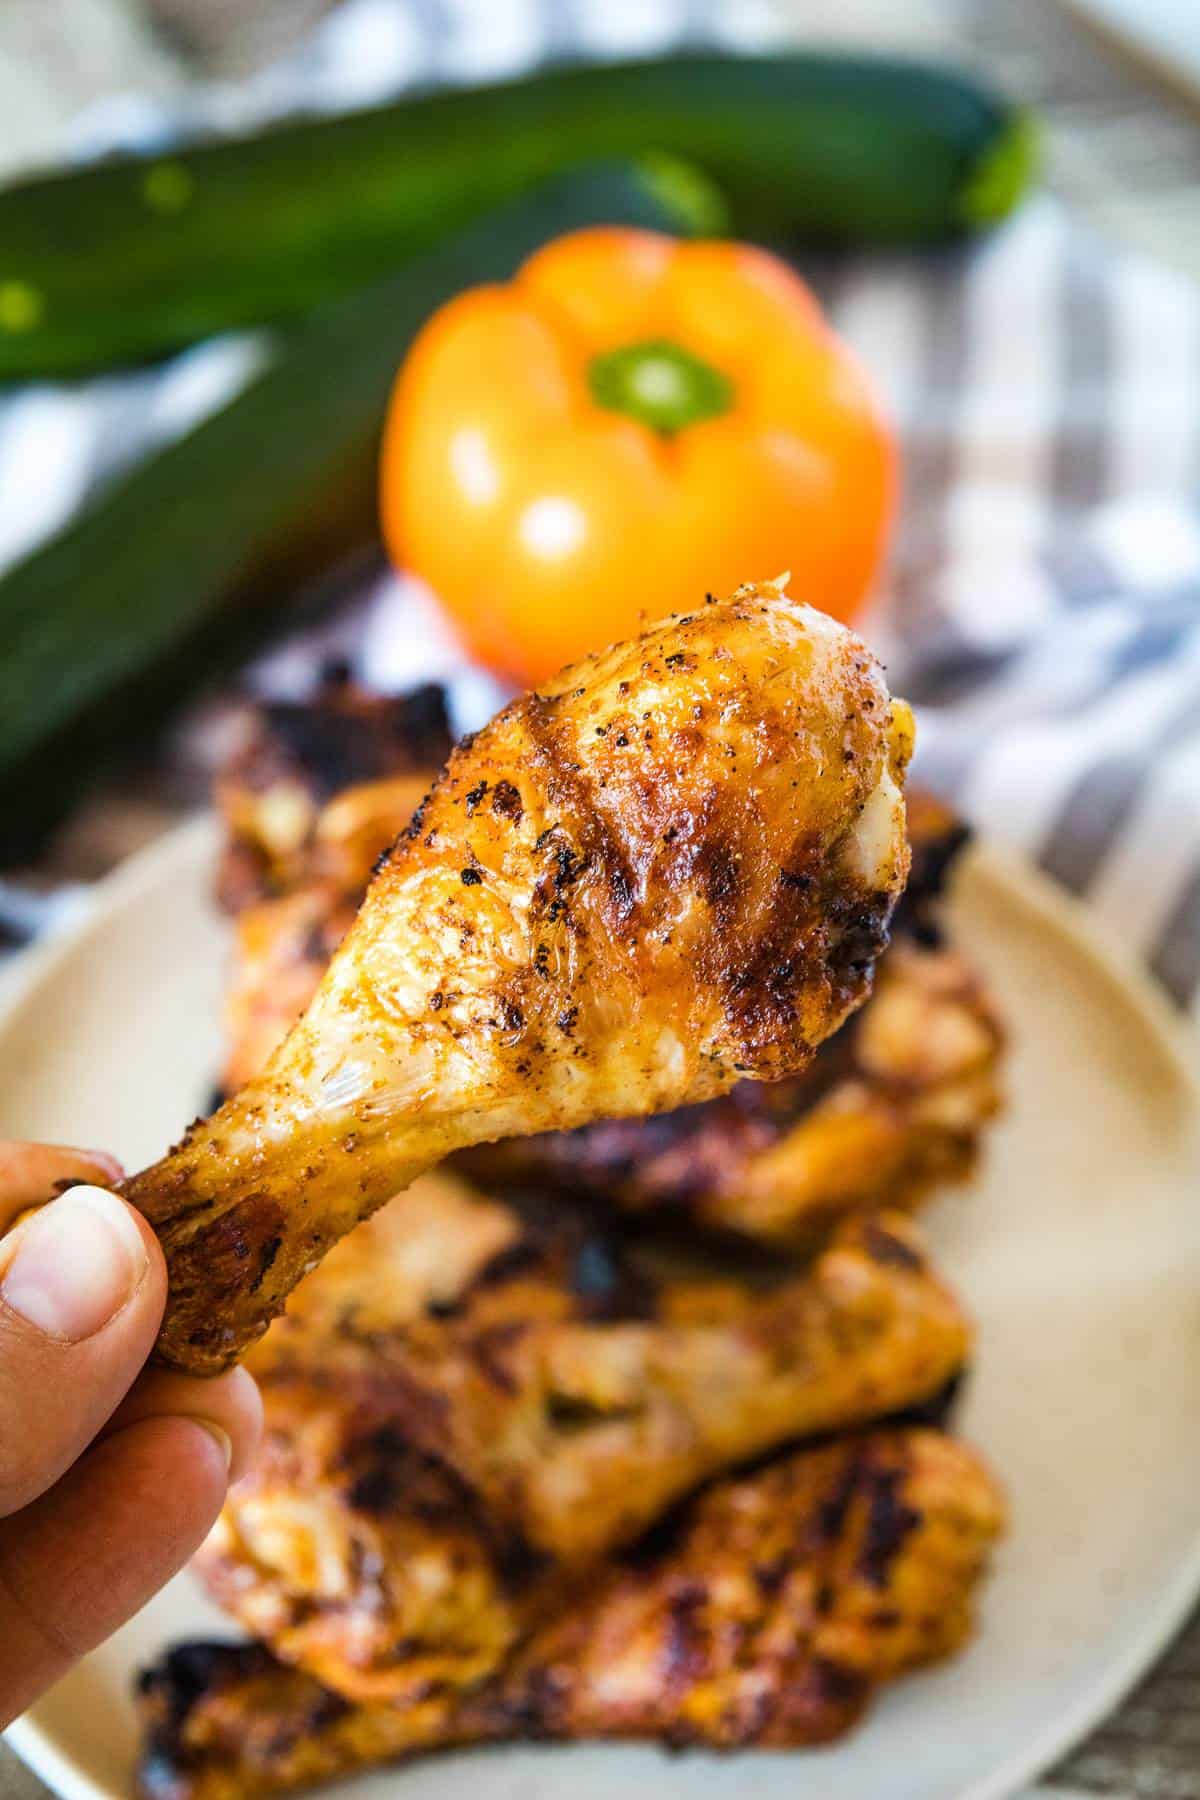 Fingers holding grilled chicken leg with plate of chicken legs in background along with orange pepper and zucchinis